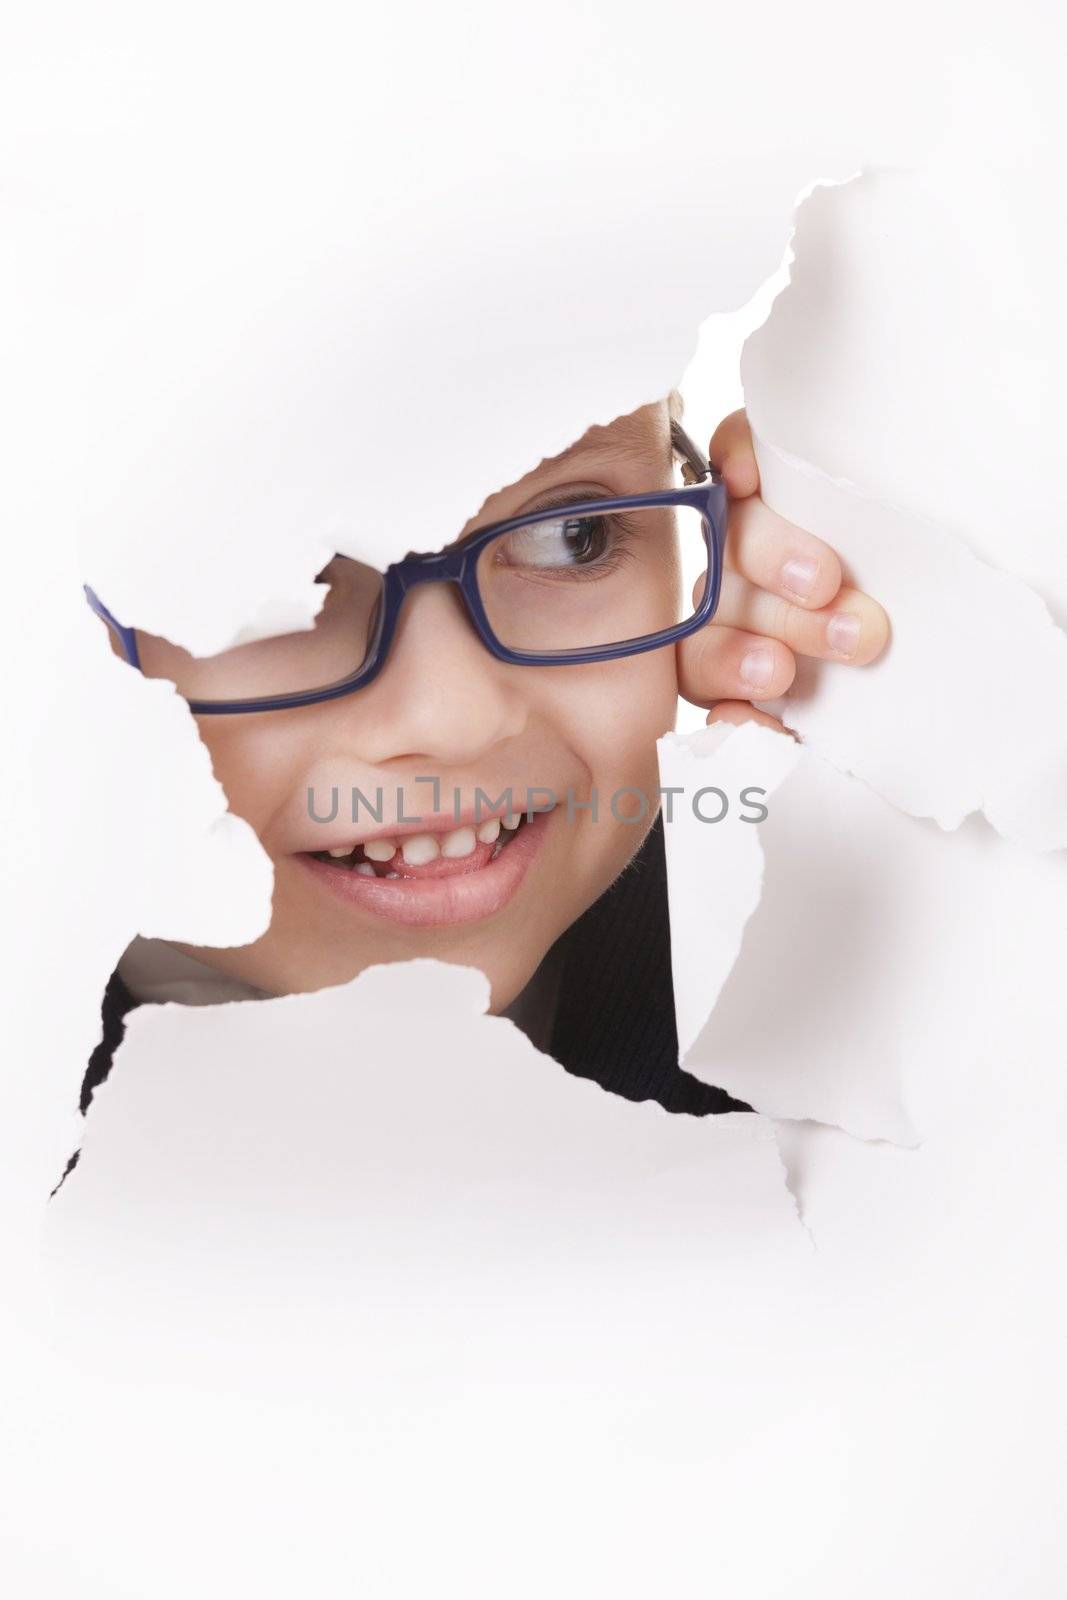 Curious kid in spectacles looks through a hole in white paper